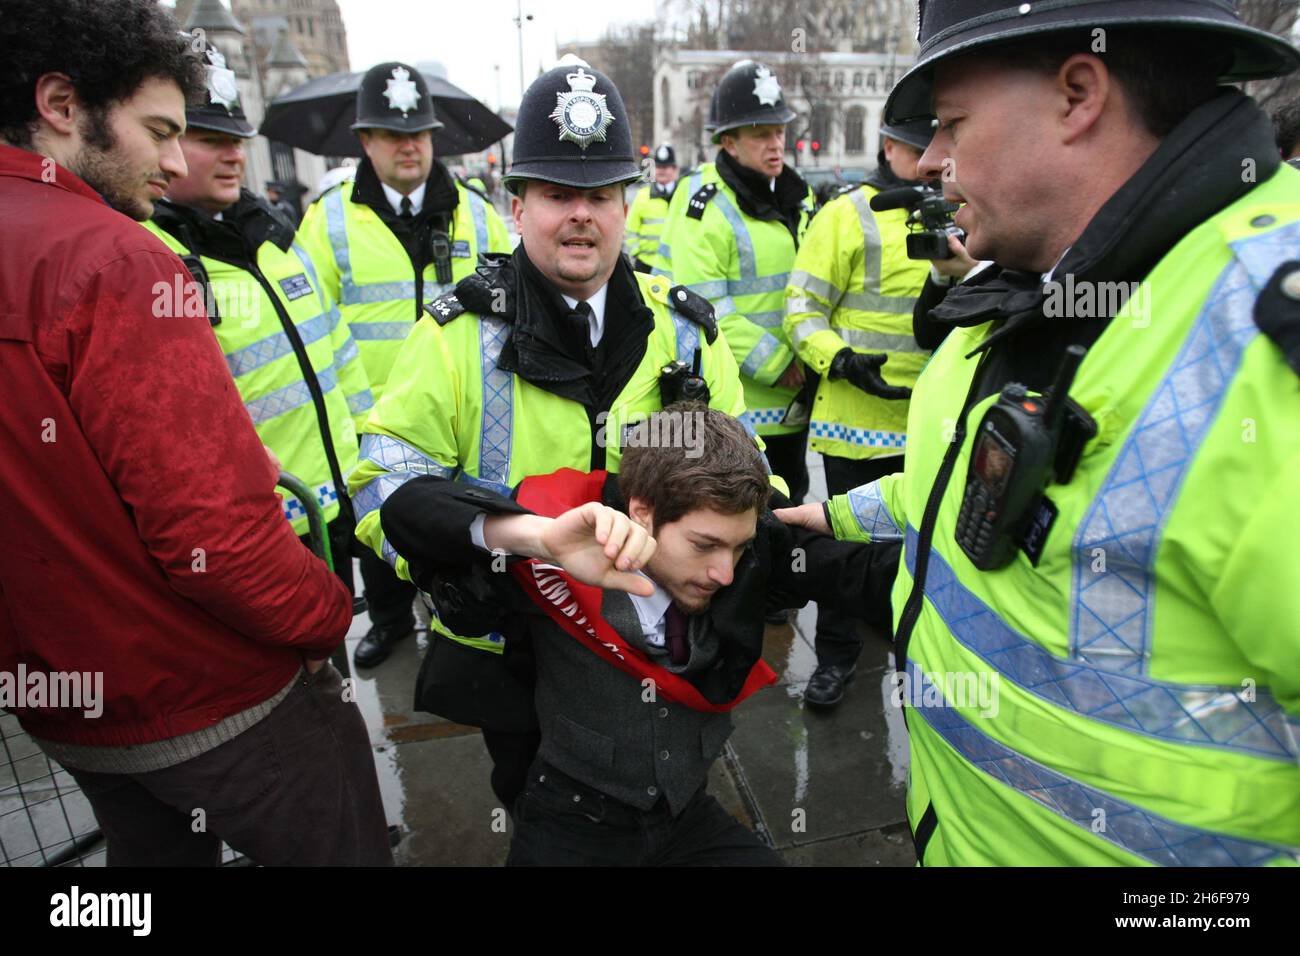 A protester is taken away by the police during a demonstration where protesters chained themselves to the railings of the House of Commons in London in demonstration against the proposed third runway at Heathrow Airport. Stock Photo